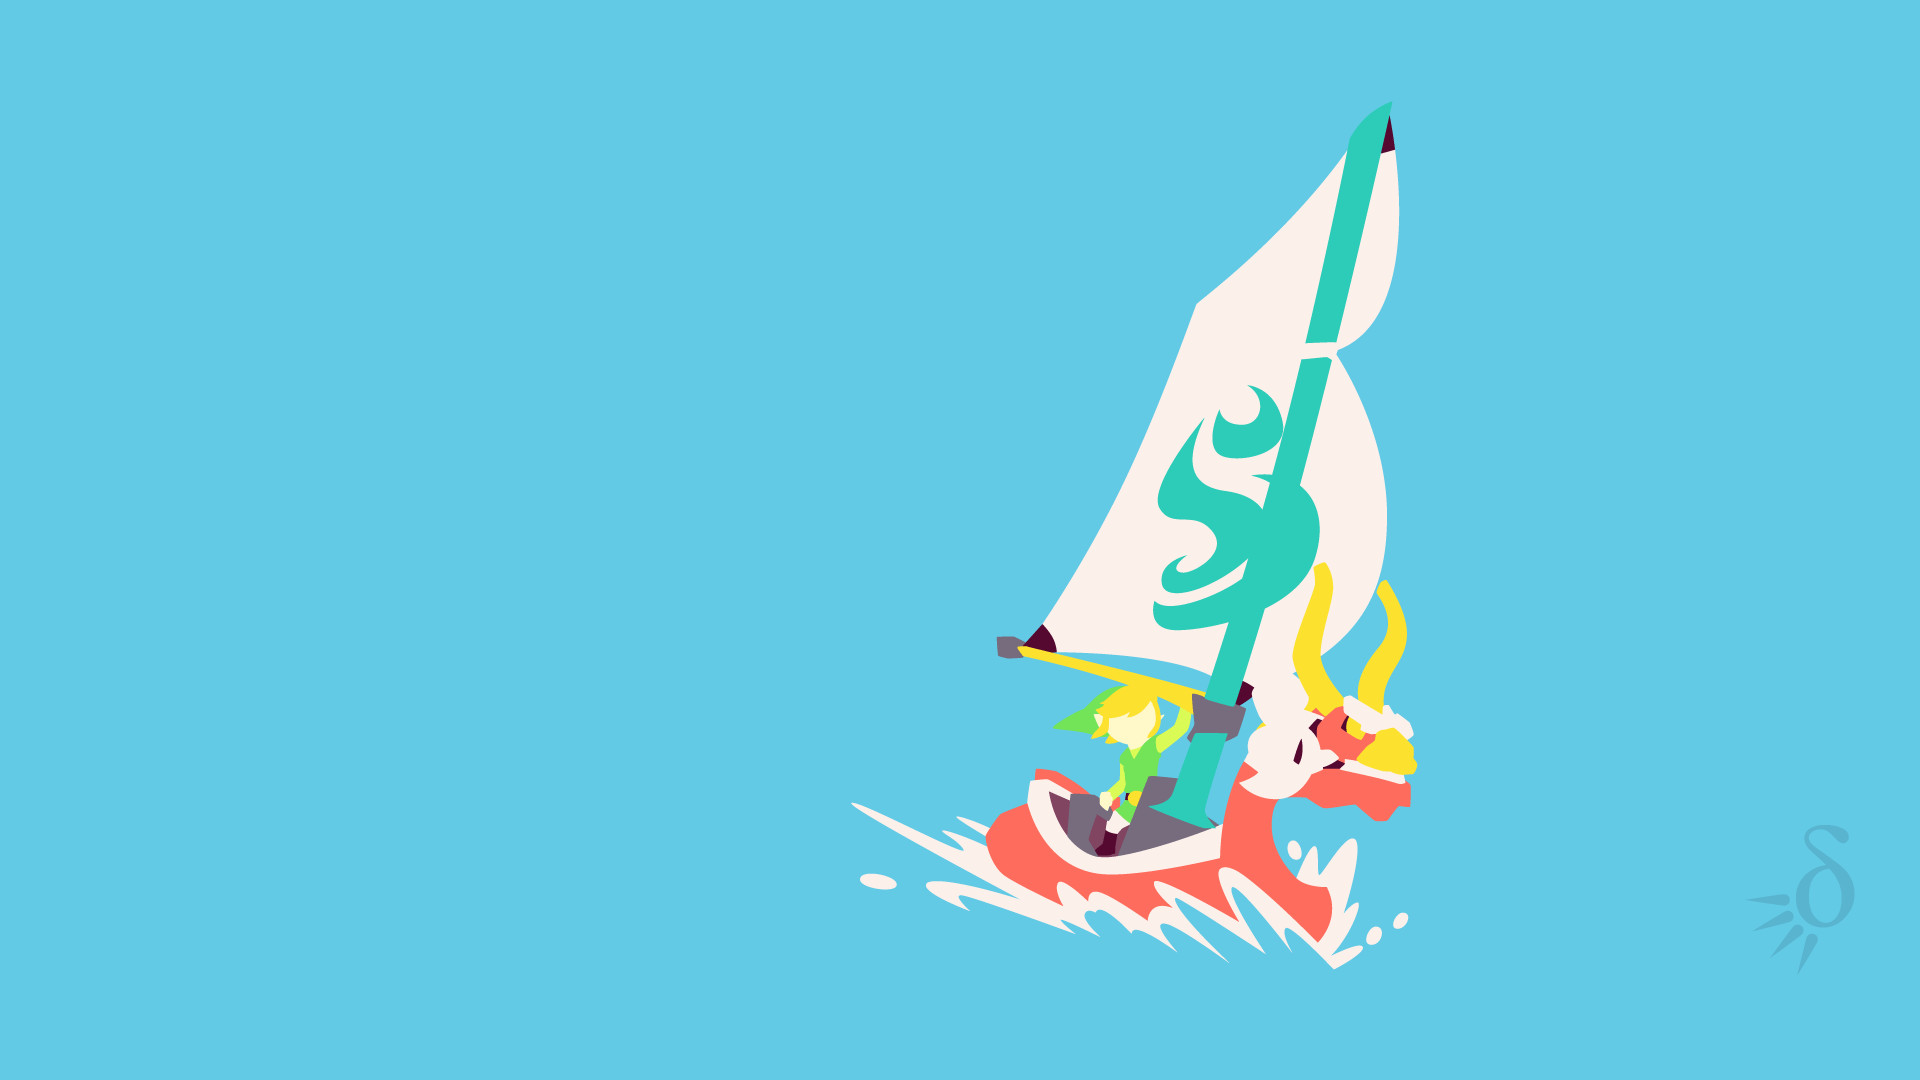 1920x1080 ... Nice Wind Waker Wallpaper of awesome full screen HD wallpapers to  download for free. You